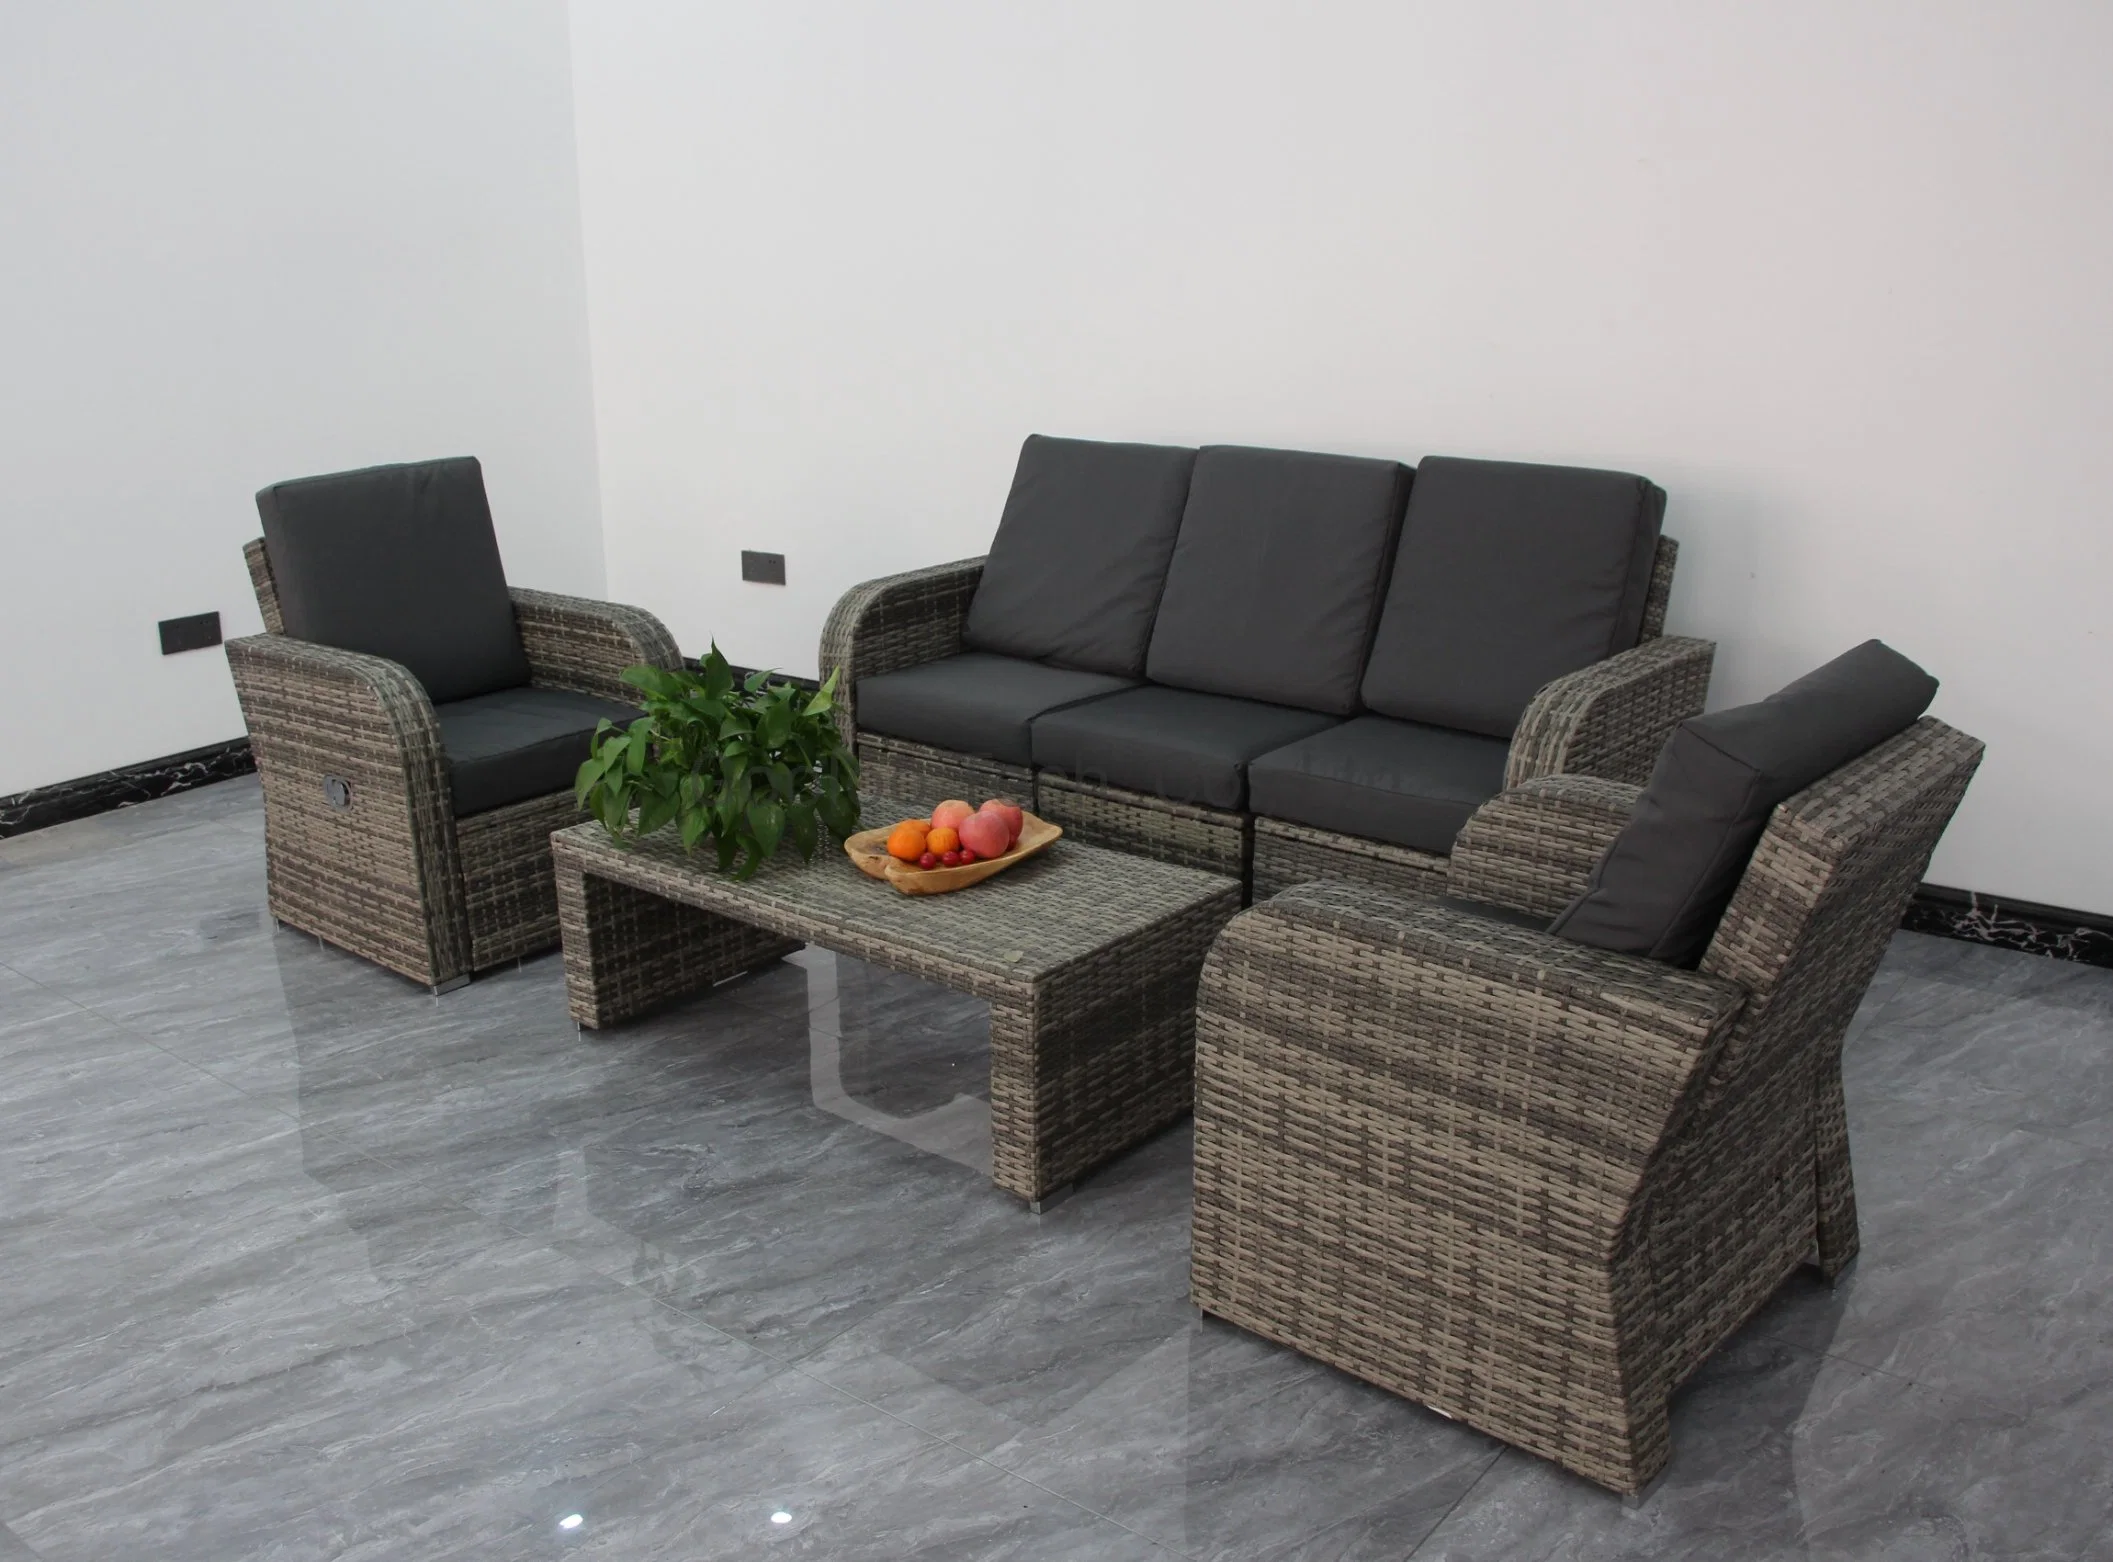 Outdoor Sofa and Table Set Outdoor Furniture